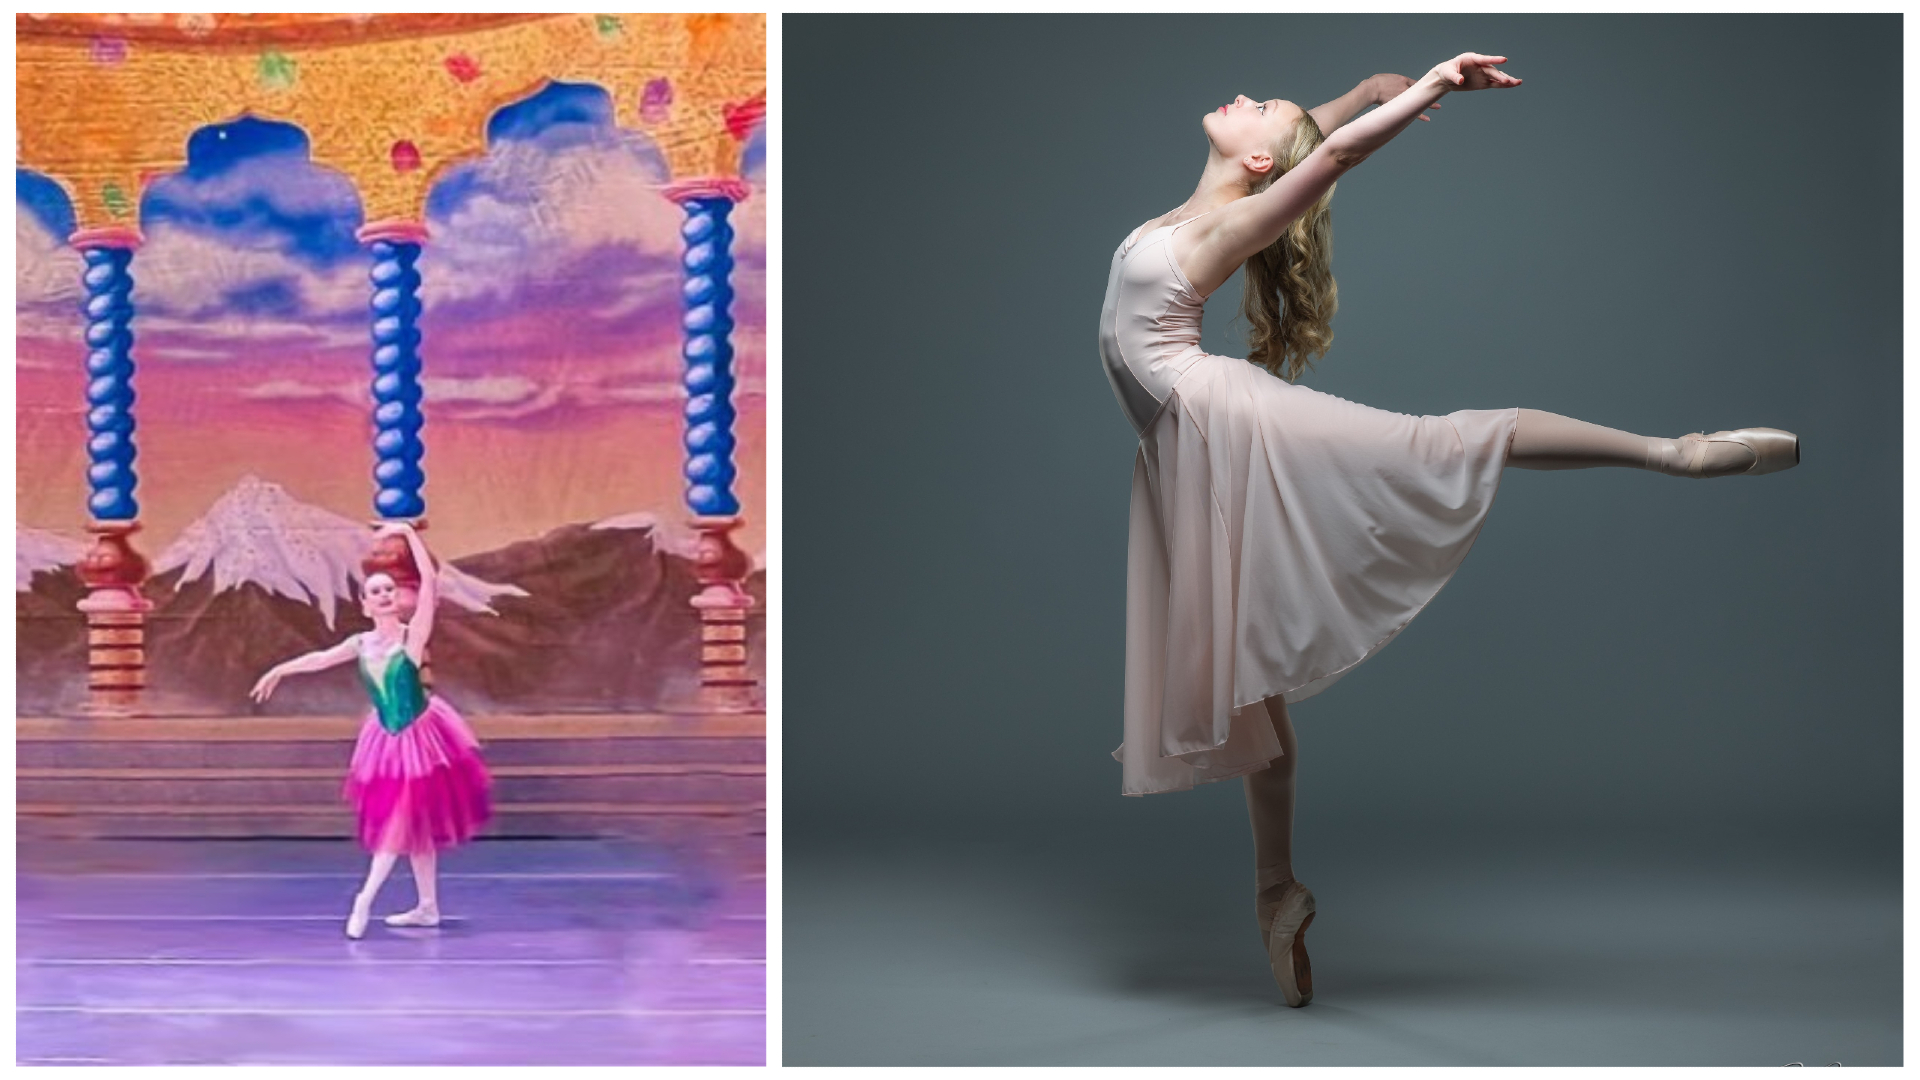 When hip pain became unbearable for 18-year-old ballerina Elise, she was referred to Atrium Health Wake Forest Baptist’s Performing Arts Medicine Clinic. As a result, the Charlotte Ballet trainee is back on stage and performing in a holiday classic. 